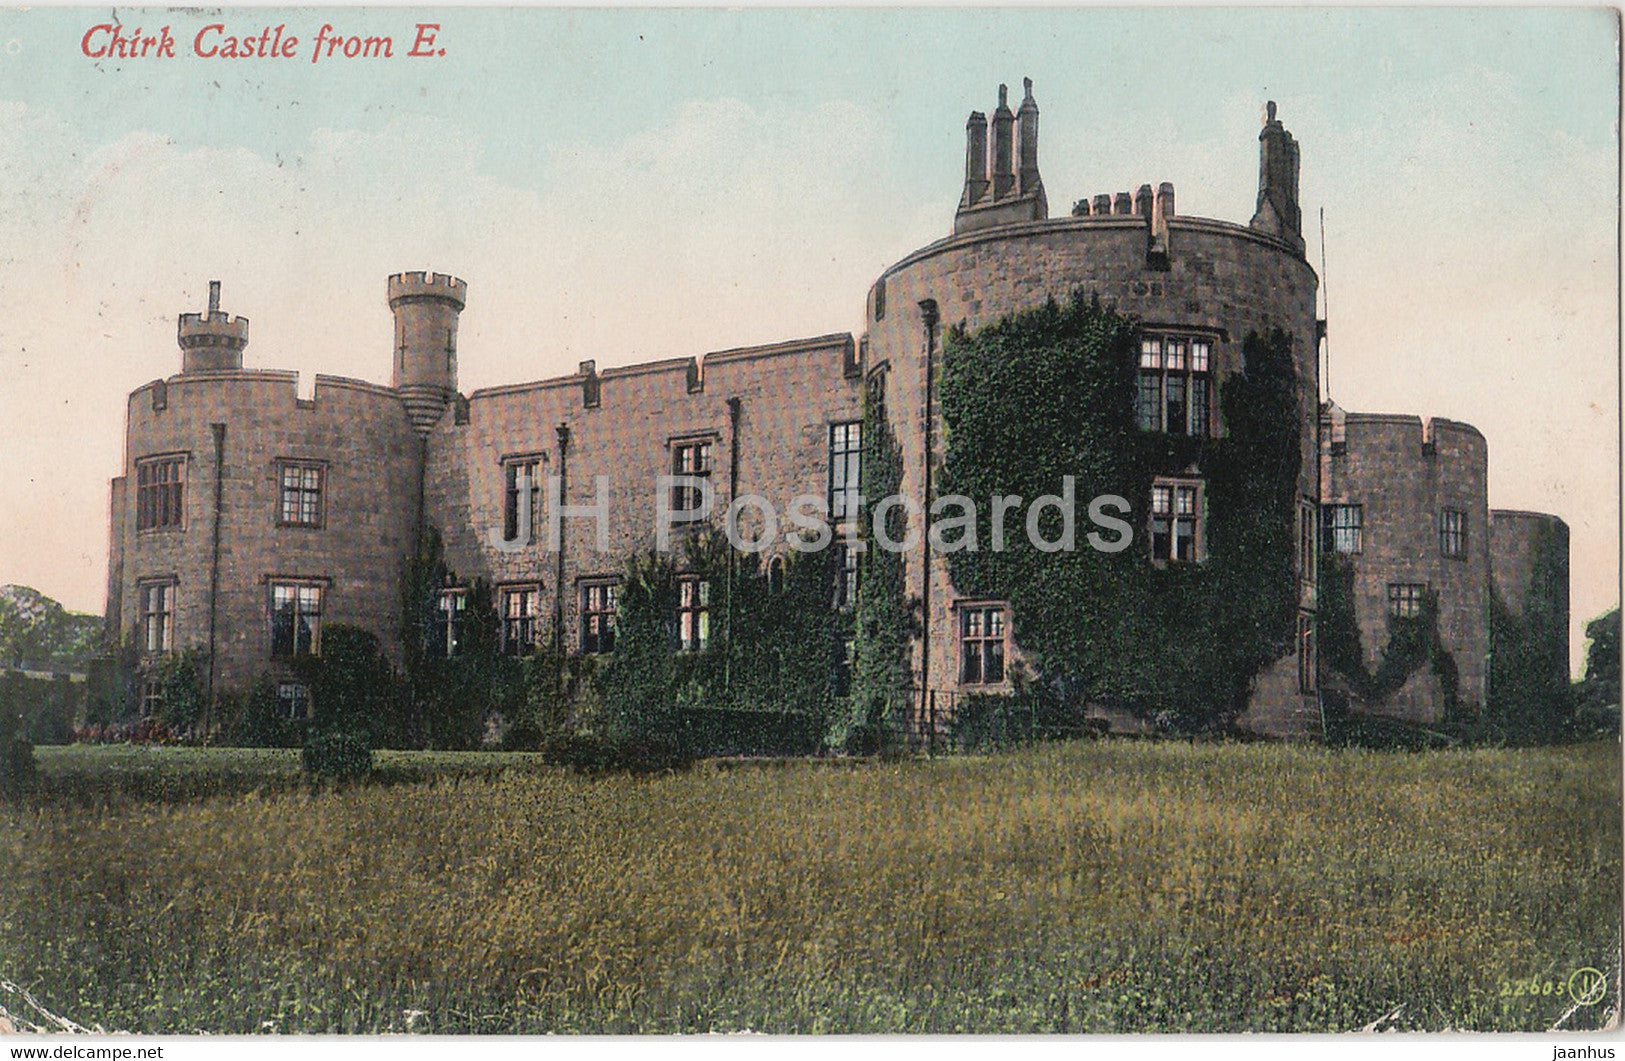 Chirk Castle from E - old postcard - 1910 - Wales - United Kingdom - used - JH Postcards